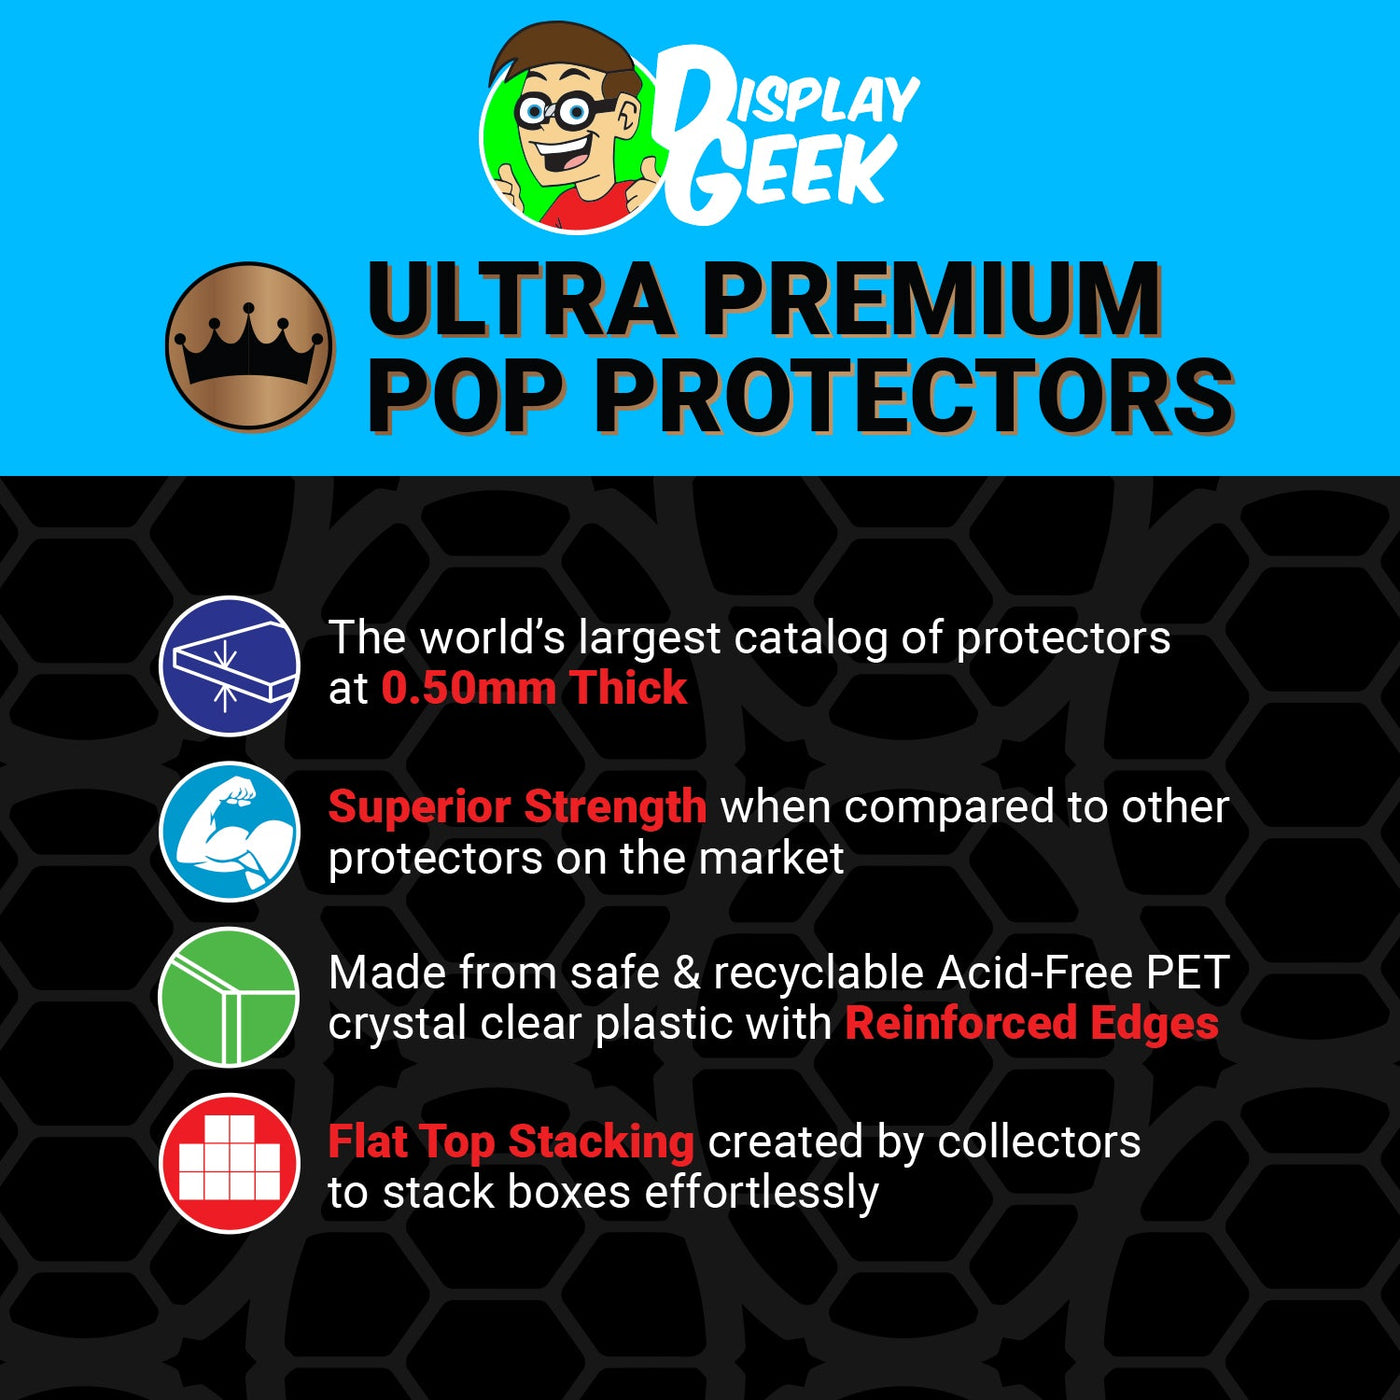 Pop Protector for Freddy Funko Aloha Freddy on The Protector Guide App by Display Geek